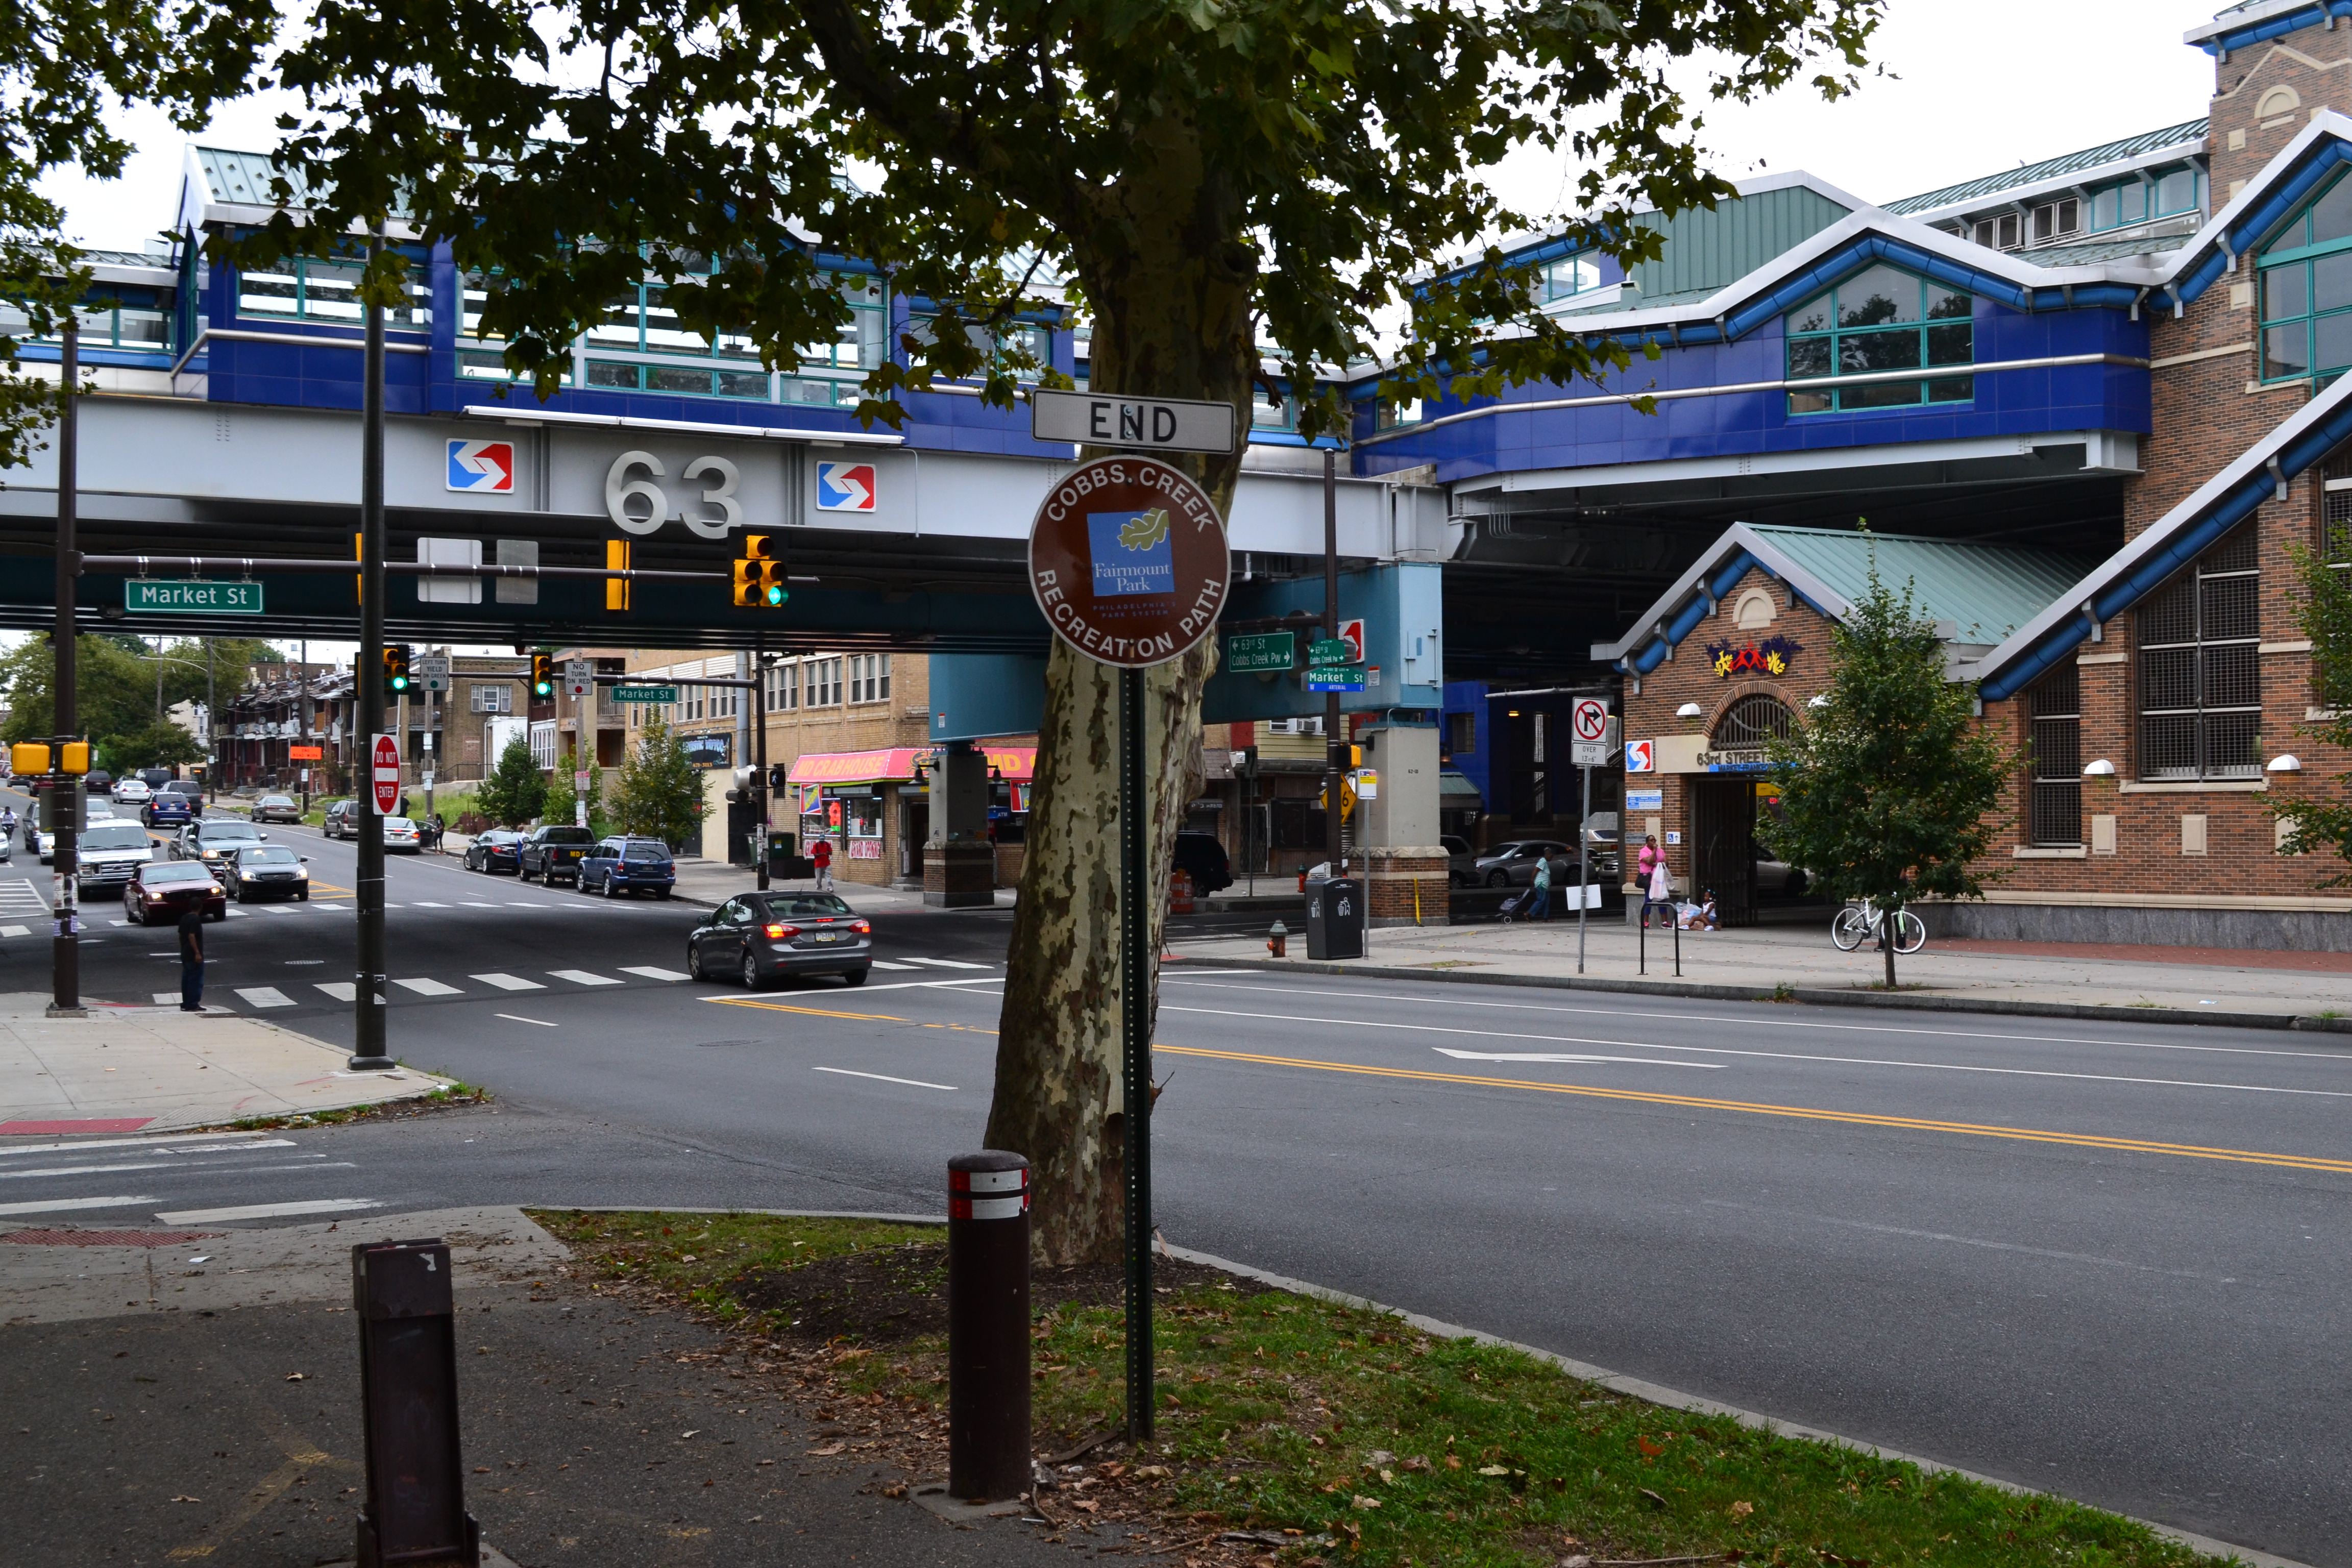 The northern end of the trail is marked by 63rd and Market street, which also provides public transit access